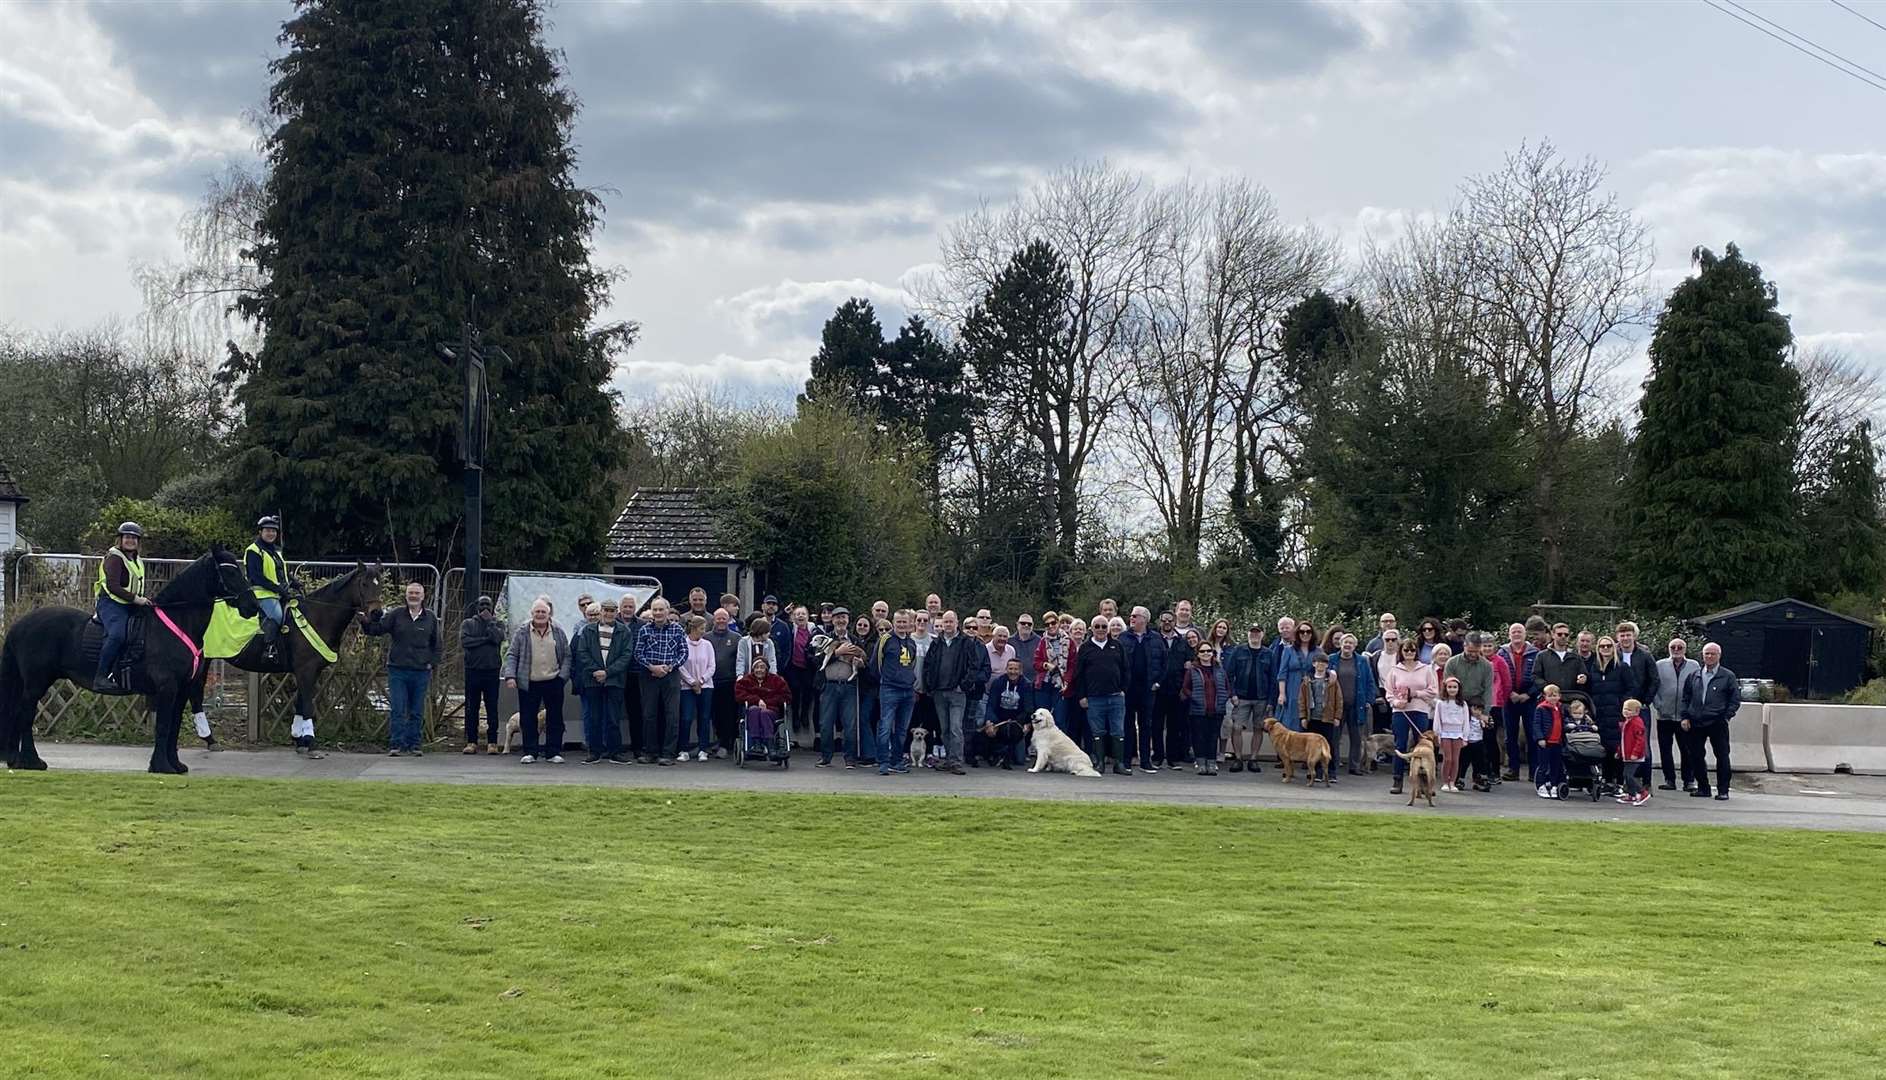 Nearly 100 people came out to support a campaign to save the Green Man Pub in Hodsoll Street from redevelopment. Photo: Sally Samuels/The Green Man Recovery Group